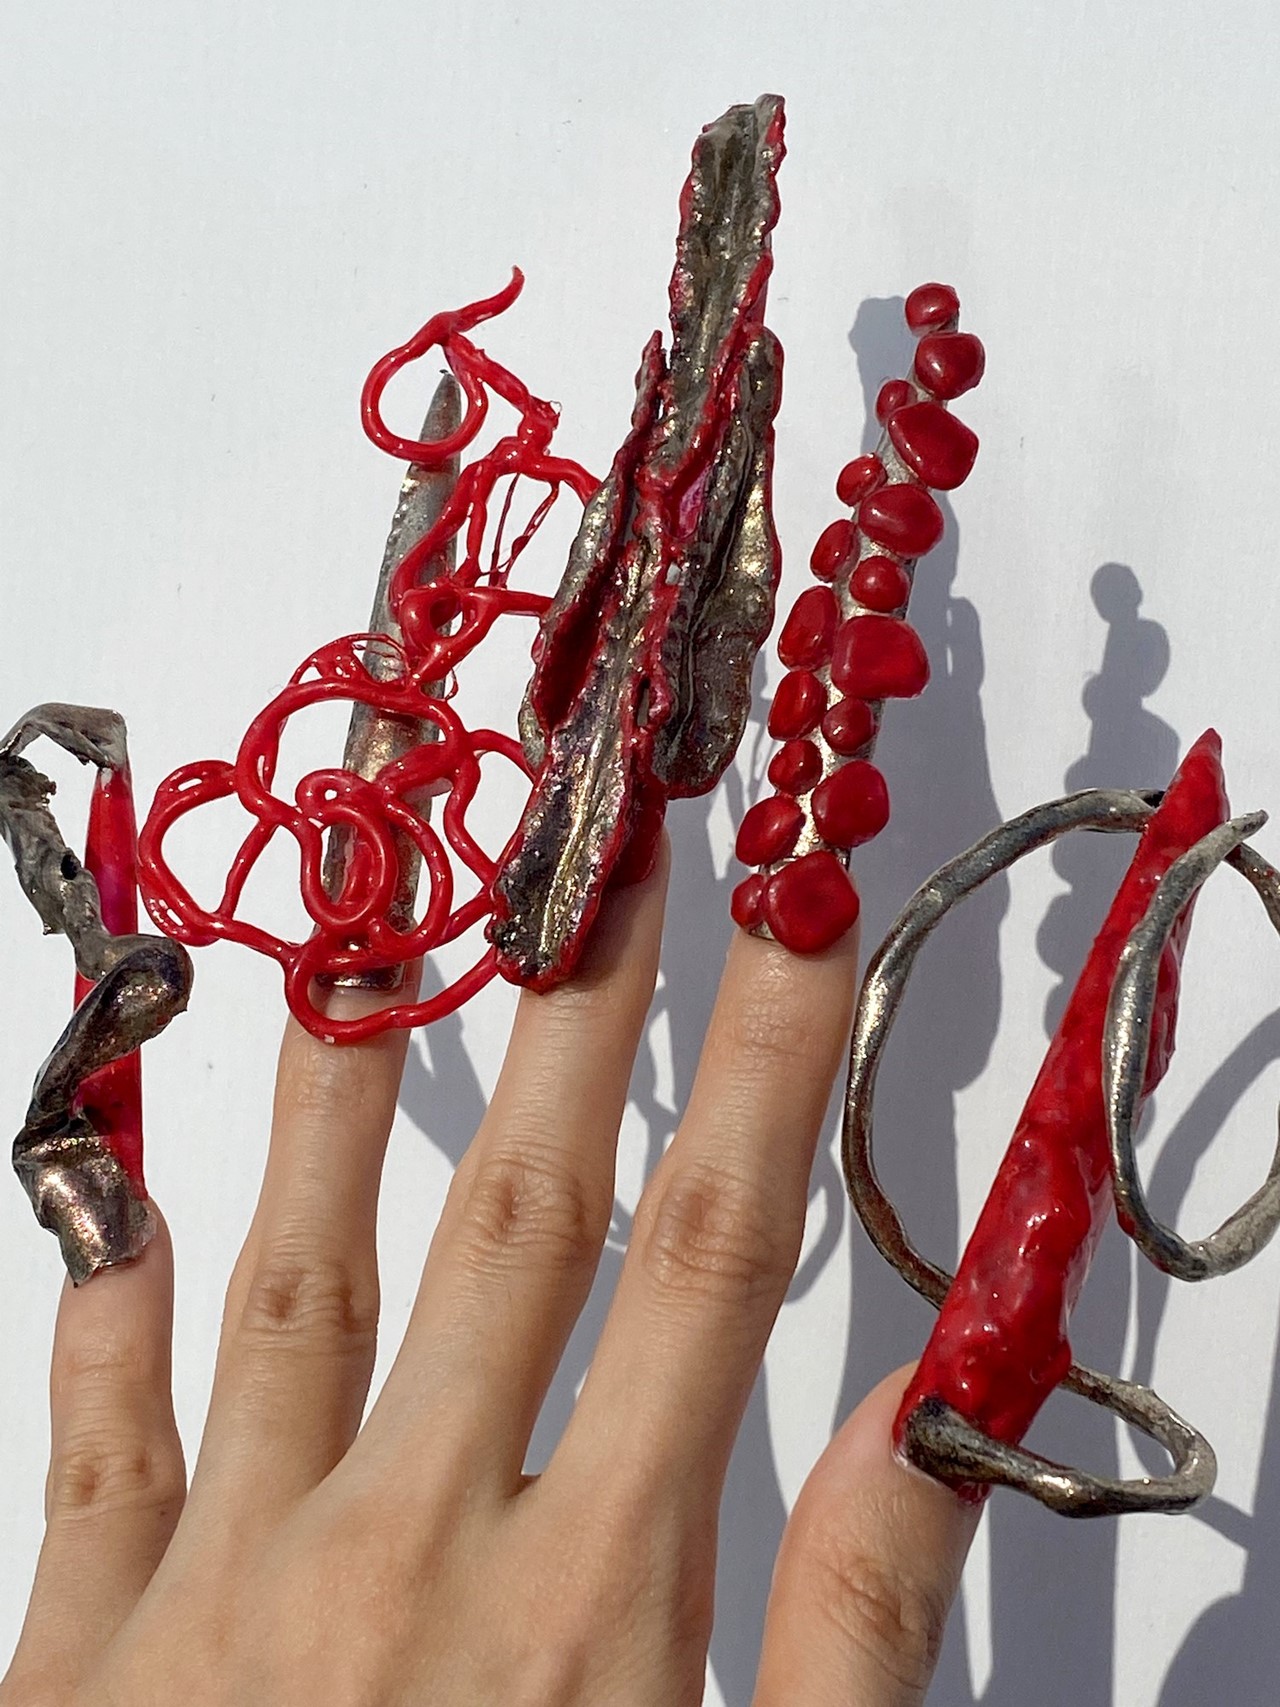 Cyshimi is the artist showing nail art can be a form resistance